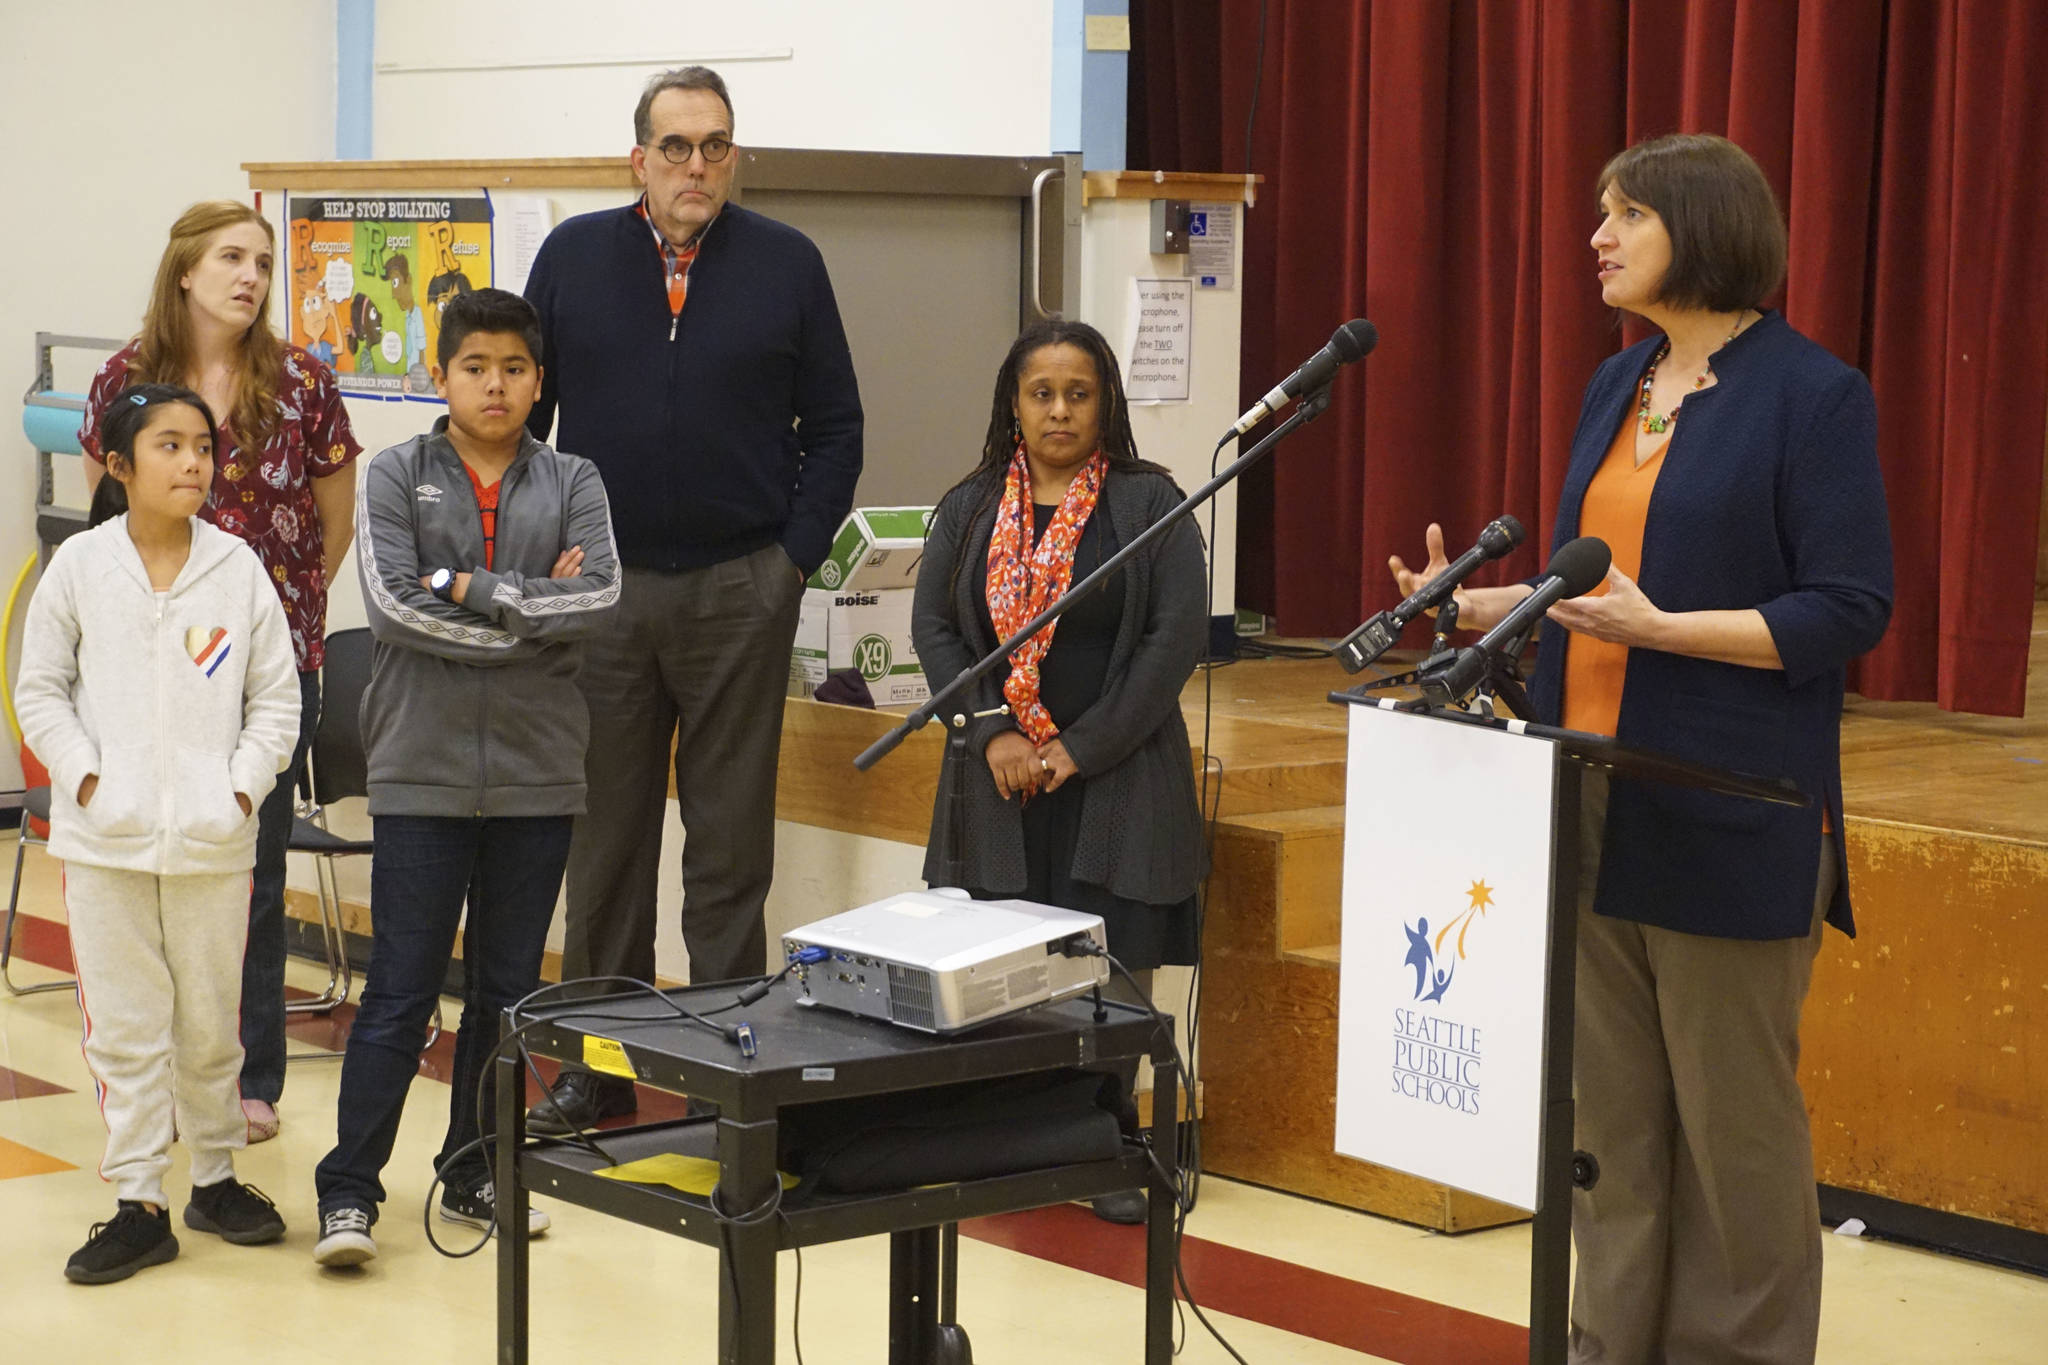 Seattle Public Schools Superintendent Denise Juneau speaks about the 2019 education levies at a Jan. 24 press conference at Northgate Elementary School. Photo by Melissa Hellmann